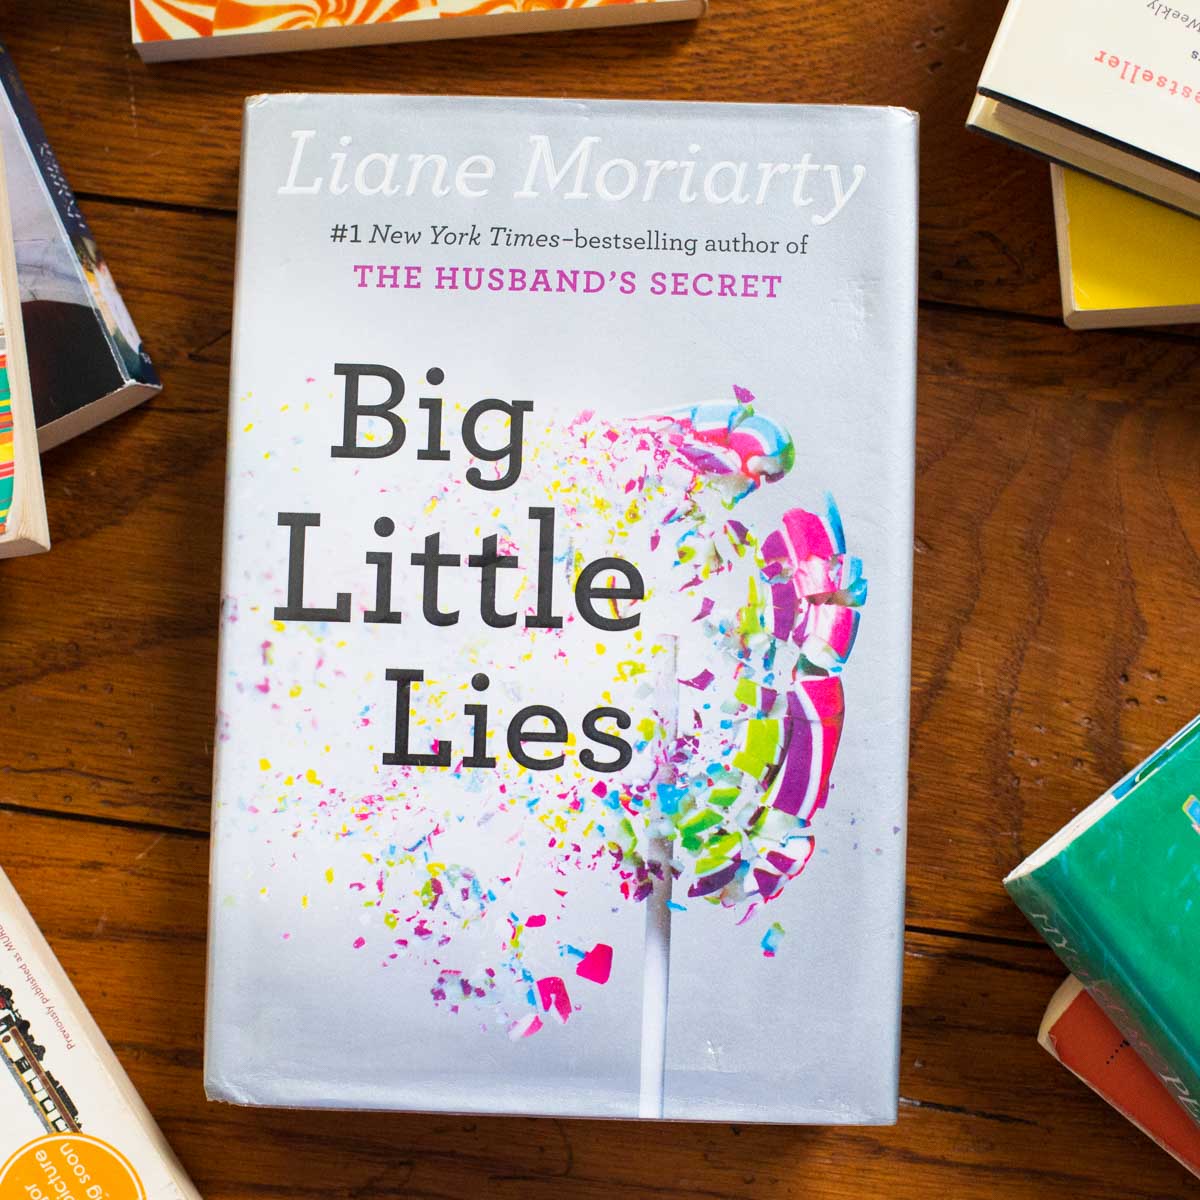 A copy of the book Big Little Lies is on the table.